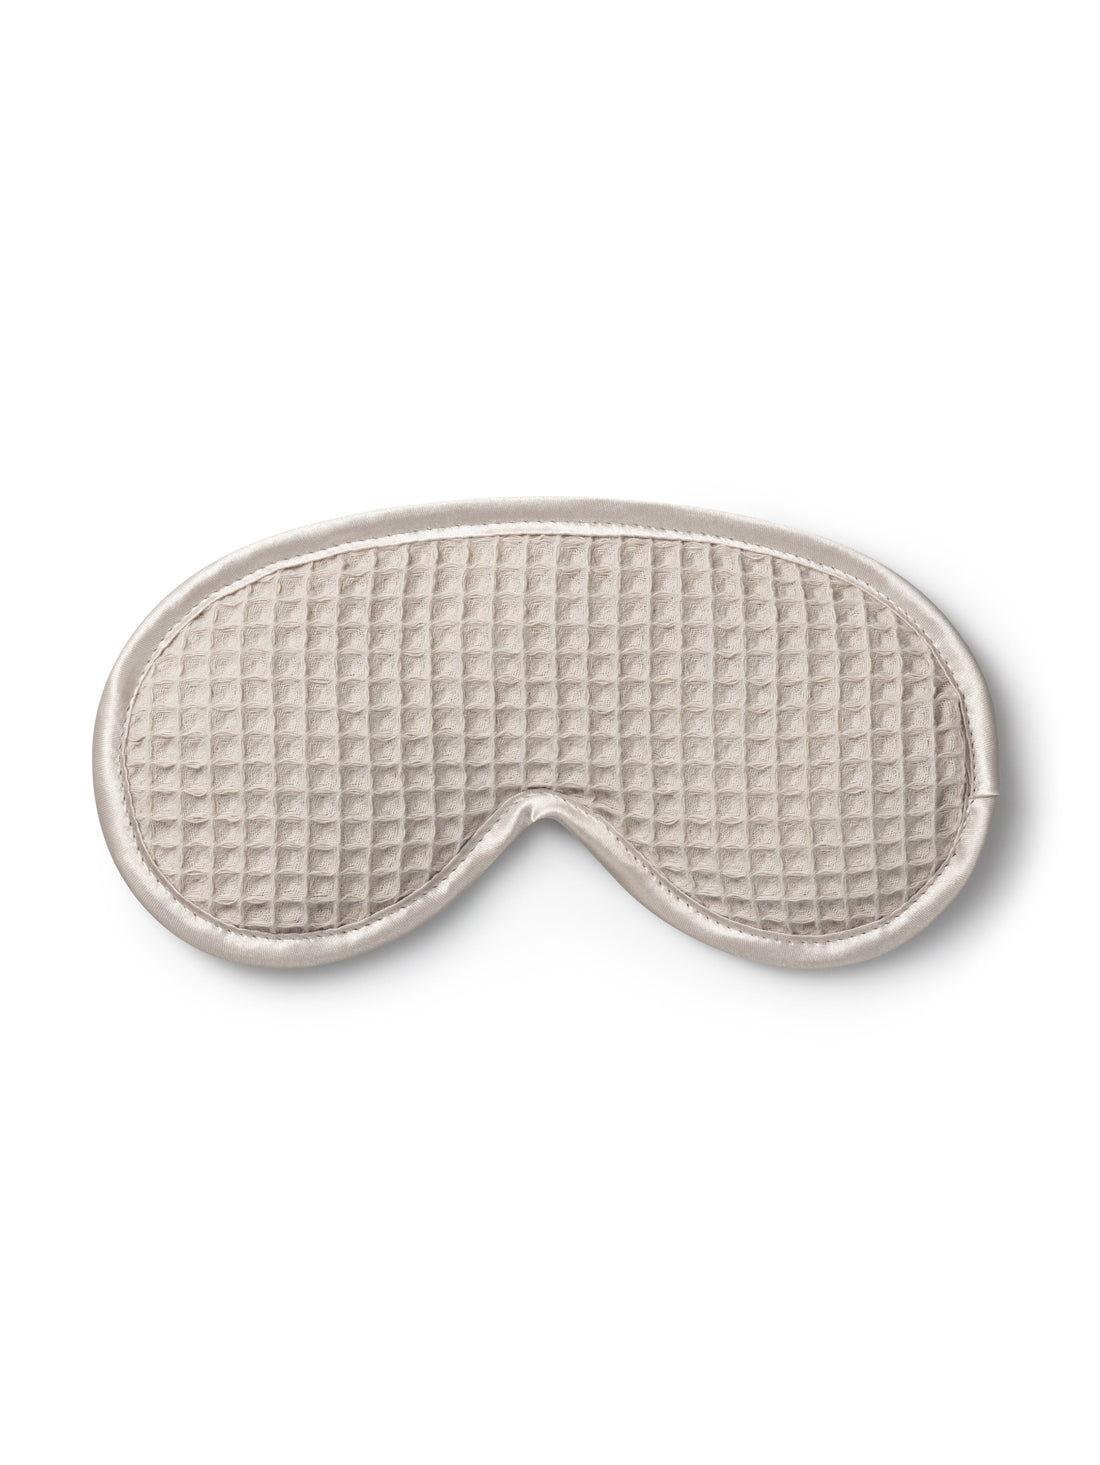 Stone waffle eye mask filled with lavender, crafted by Chalk for relaxation and restful sleep.